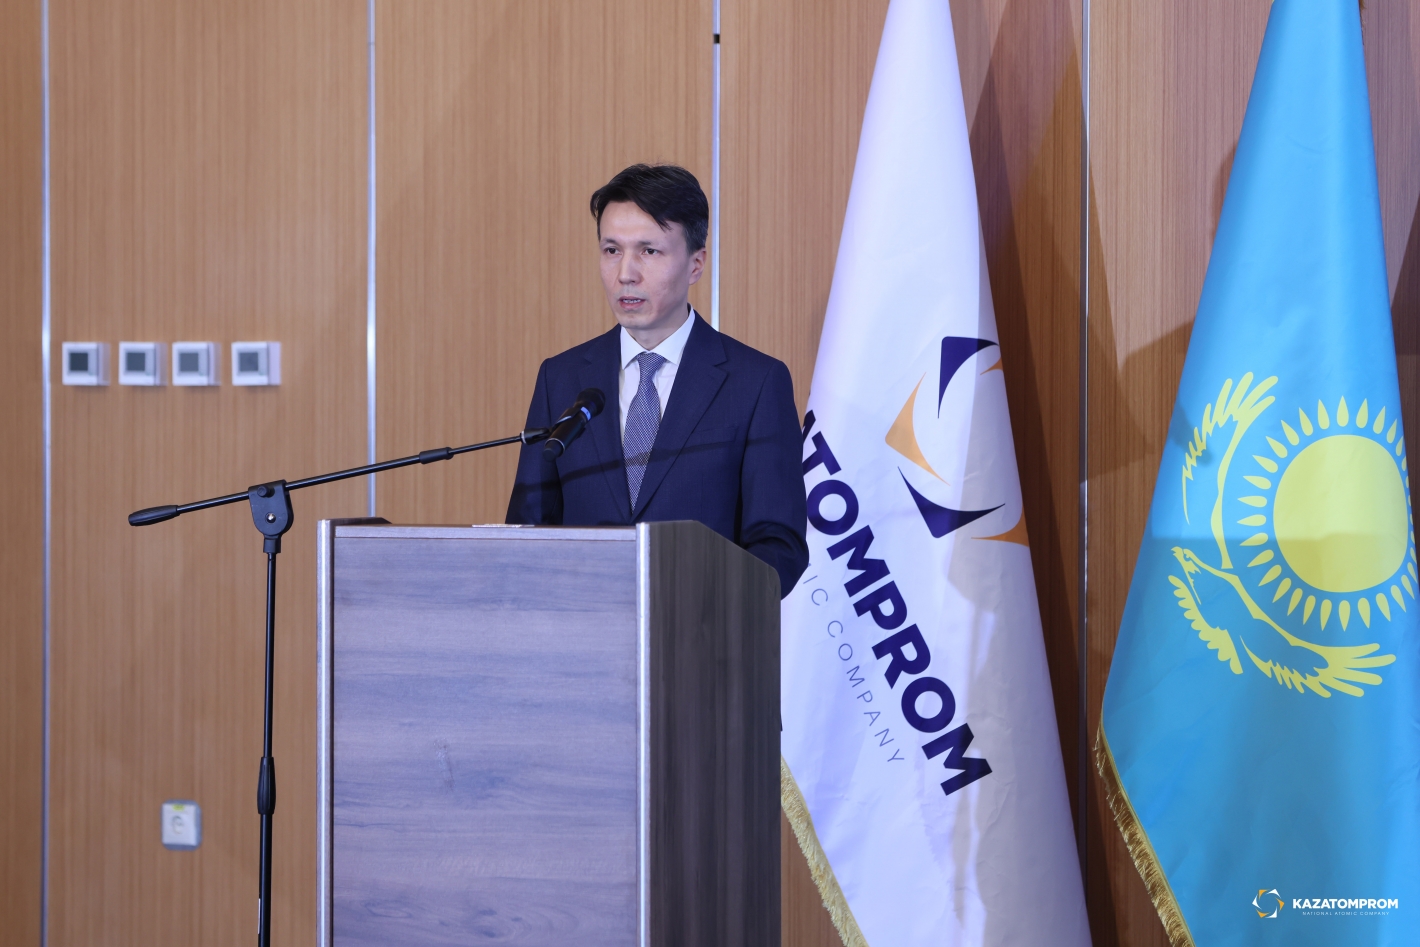 1.3 billion tenge provided by Kazatomprom partners to support flood-affected regions   